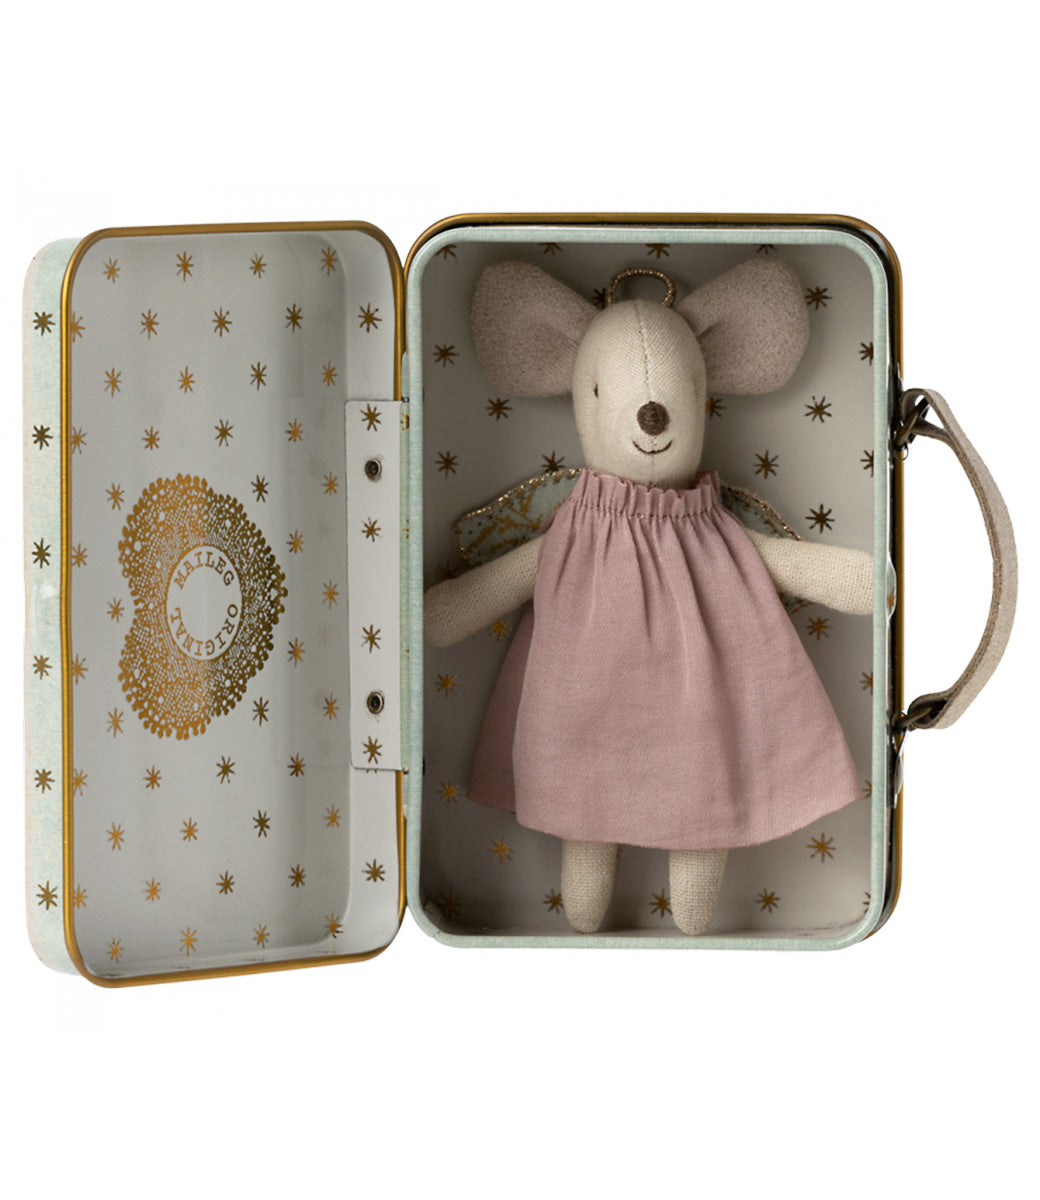 Angel mouse - in box